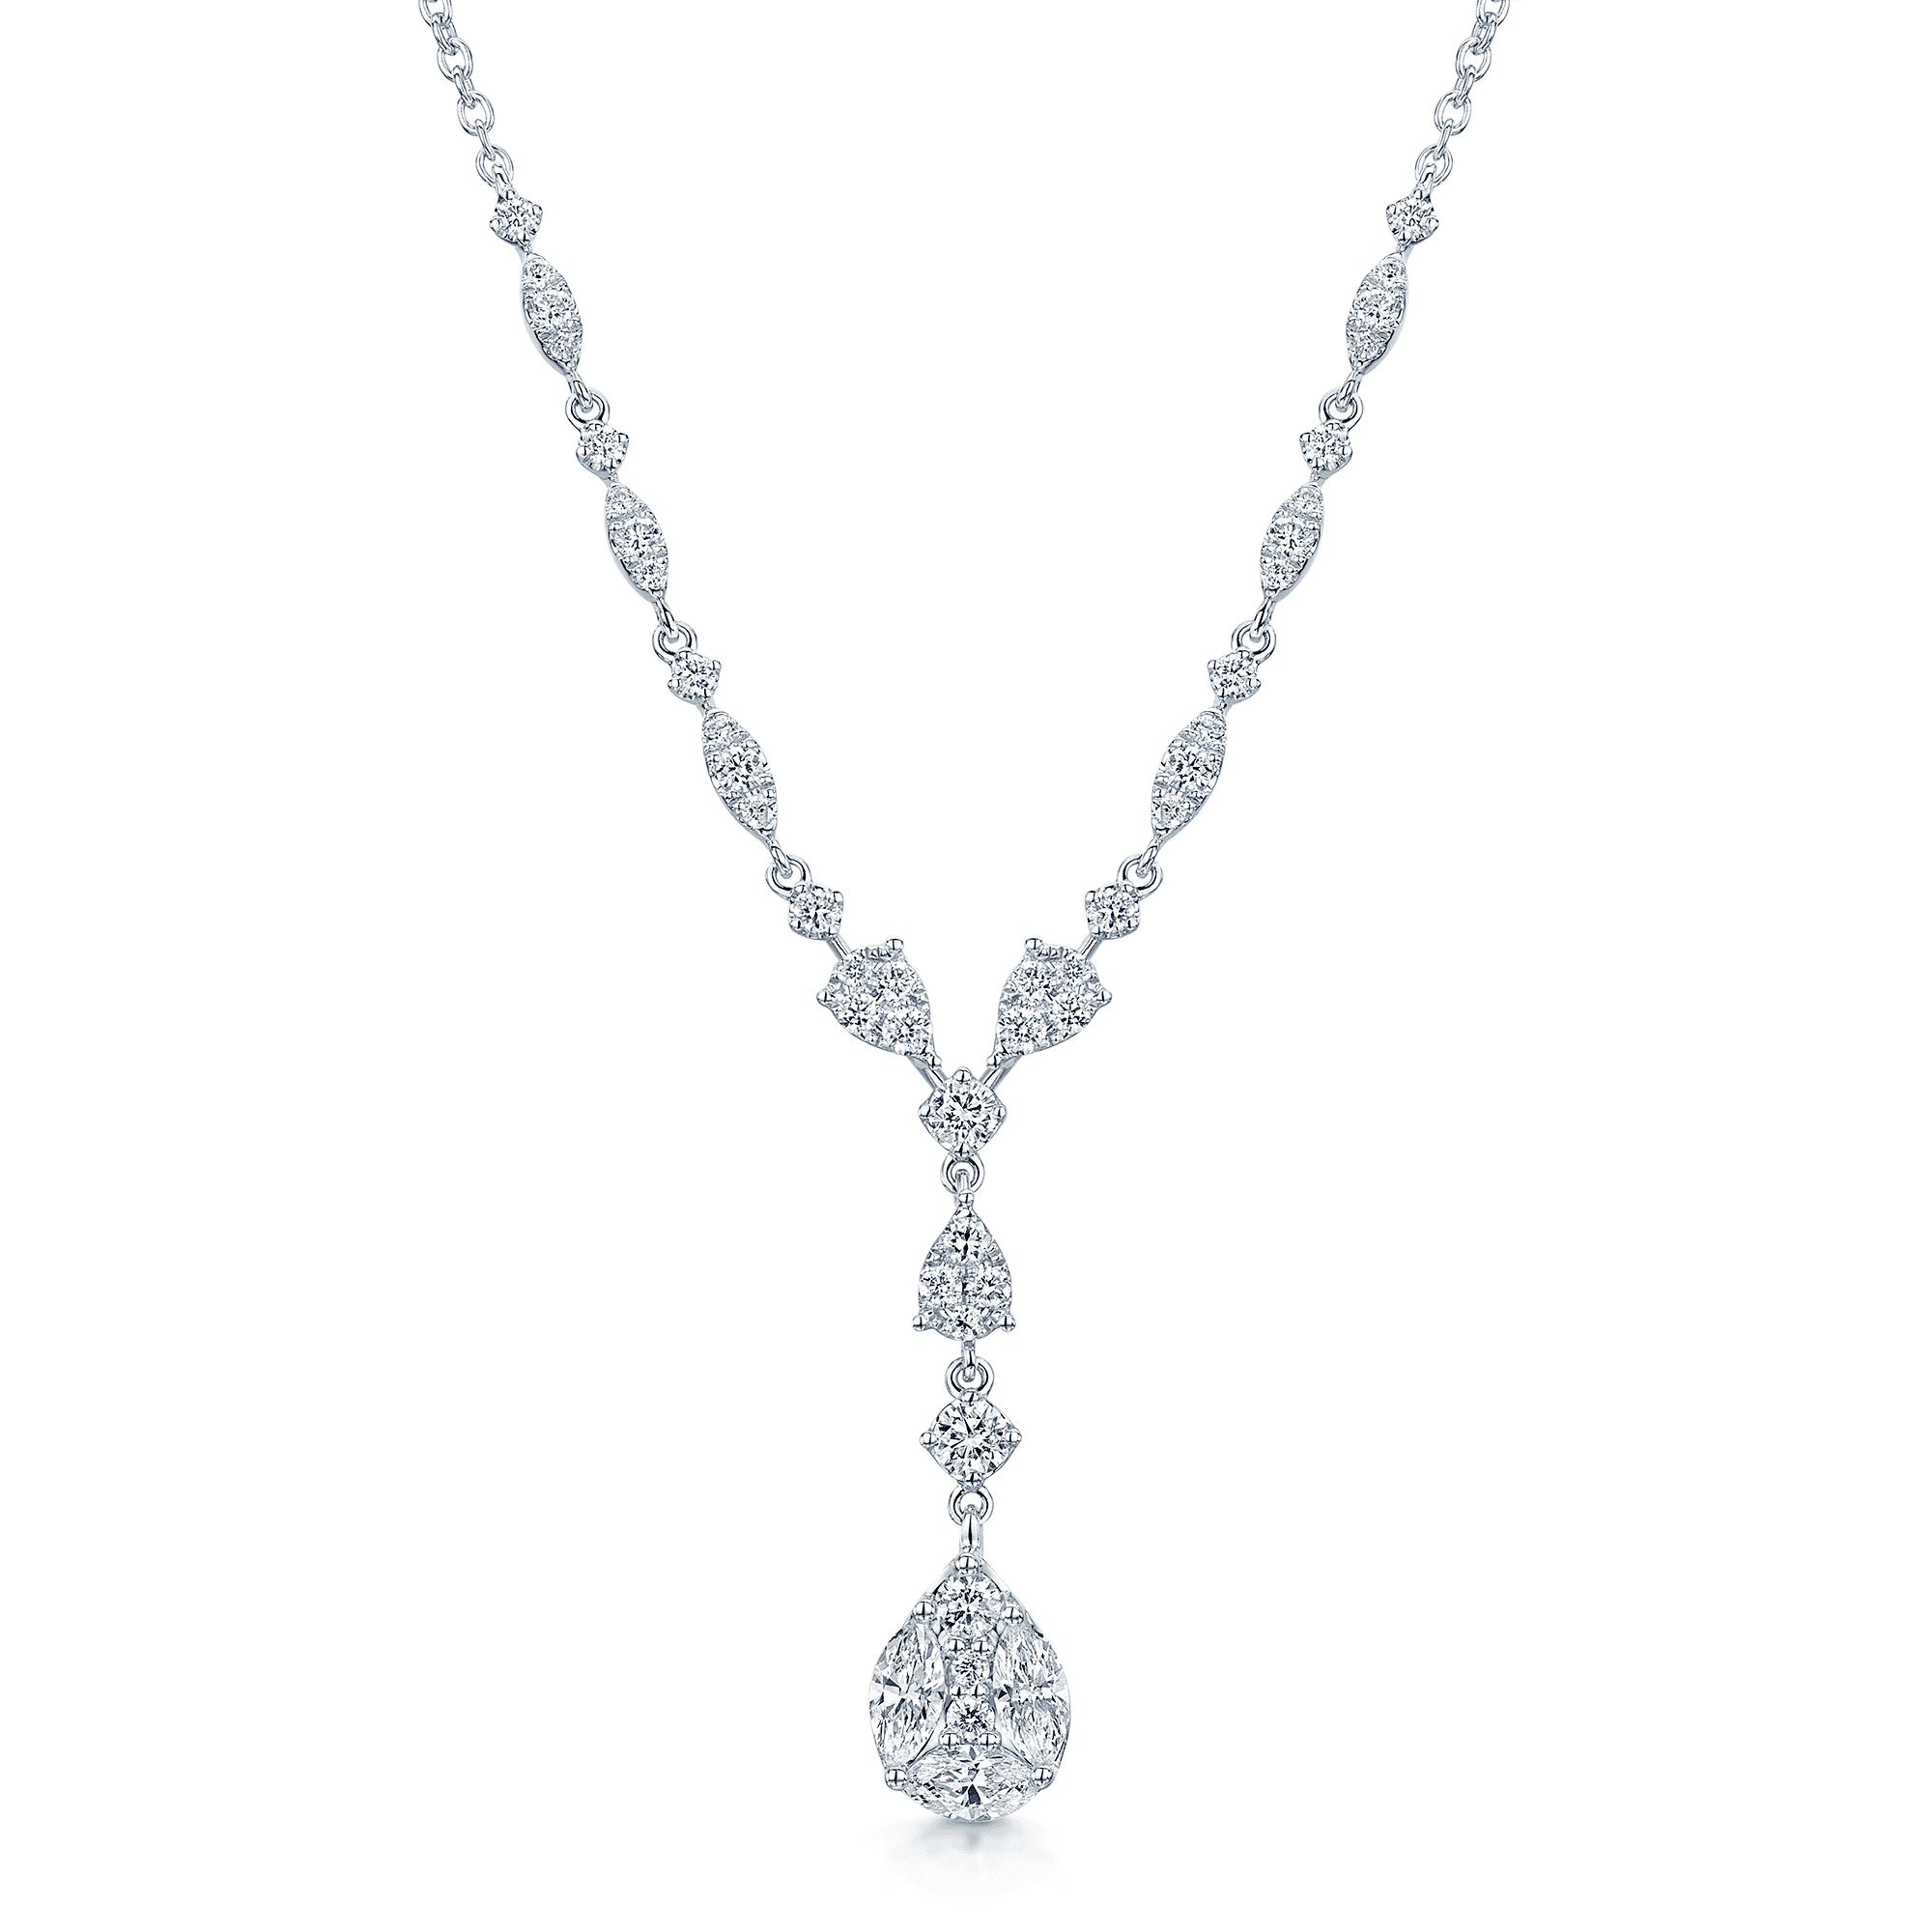 18ct White Gold Mixed Cut Diamond Necklace With Diamond Detail On The Chain